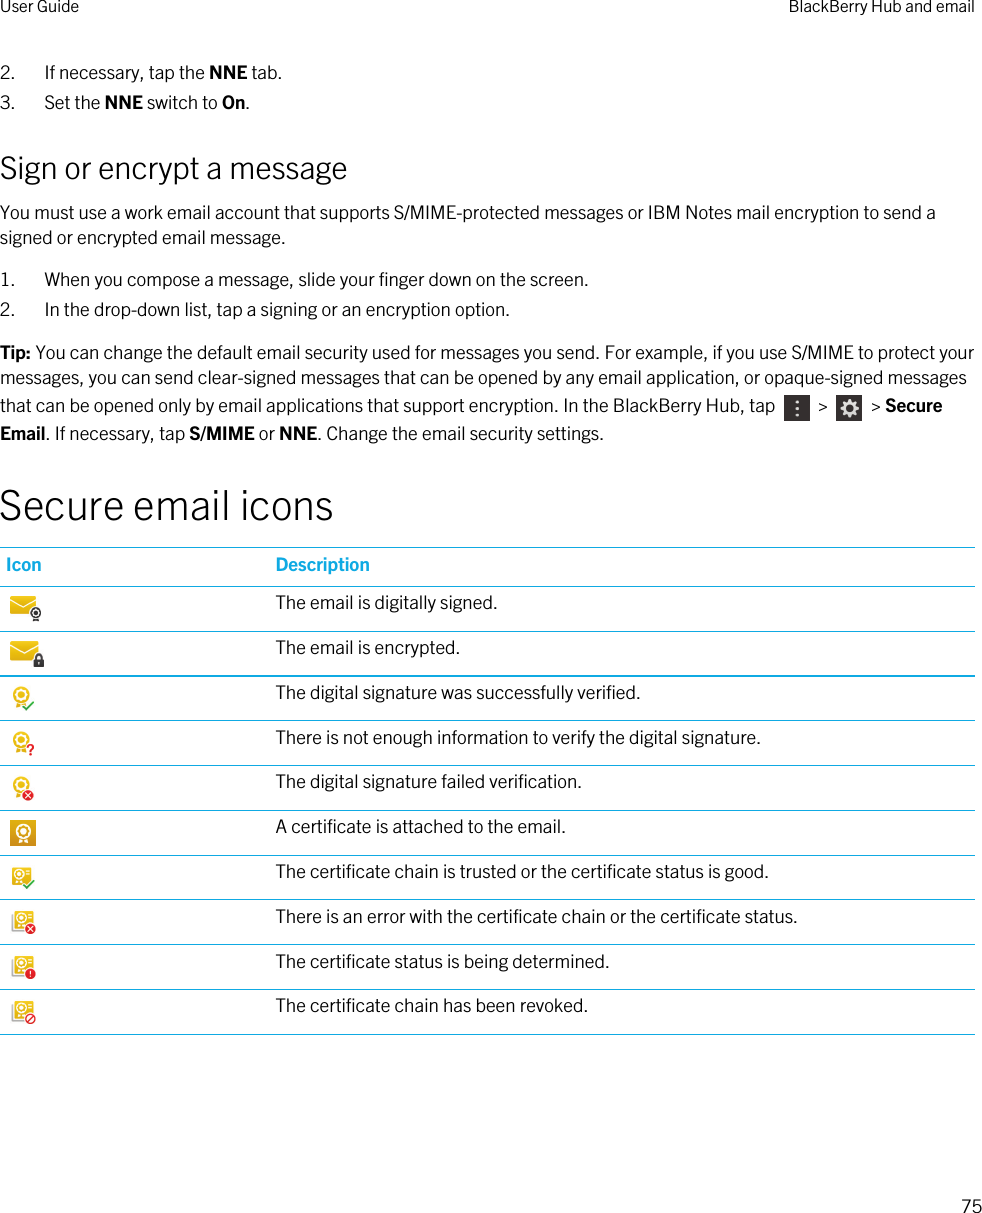 2. If necessary, tap the NNE tab.3. Set the NNE switch to On.Sign or encrypt a messageYou must use a work email account that supports S/MIME-protected messages or IBM Notes mail encryption to send a signed or encrypted email message.1. When you compose a message, slide your finger down on the screen.2. In the drop-down list, tap a signing or an encryption option.Tip: You can change the default email security used for messages you send. For example, if you use S/MIME to protect your messages, you can send clear-signed messages that can be opened by any email application, or opaque-signed messages that can be opened only by email applications that support encryption. In the BlackBerry Hub, tap   &gt;   &gt; Secure Email. If necessary, tap S/MIME or NNE. Change the email security settings.Secure email iconsIcon DescriptionThe email is digitally signed.The email is encrypted.The digital signature was successfully verified.There is not enough information to verify the digital signature.The digital signature failed verification.A certificate is attached to the email.The certificate chain is trusted or the certificate status is good.There is an error with the certificate chain or the certificate status.The certificate status is being determined.The certificate chain has been revoked.User Guide BlackBerry Hub and email75